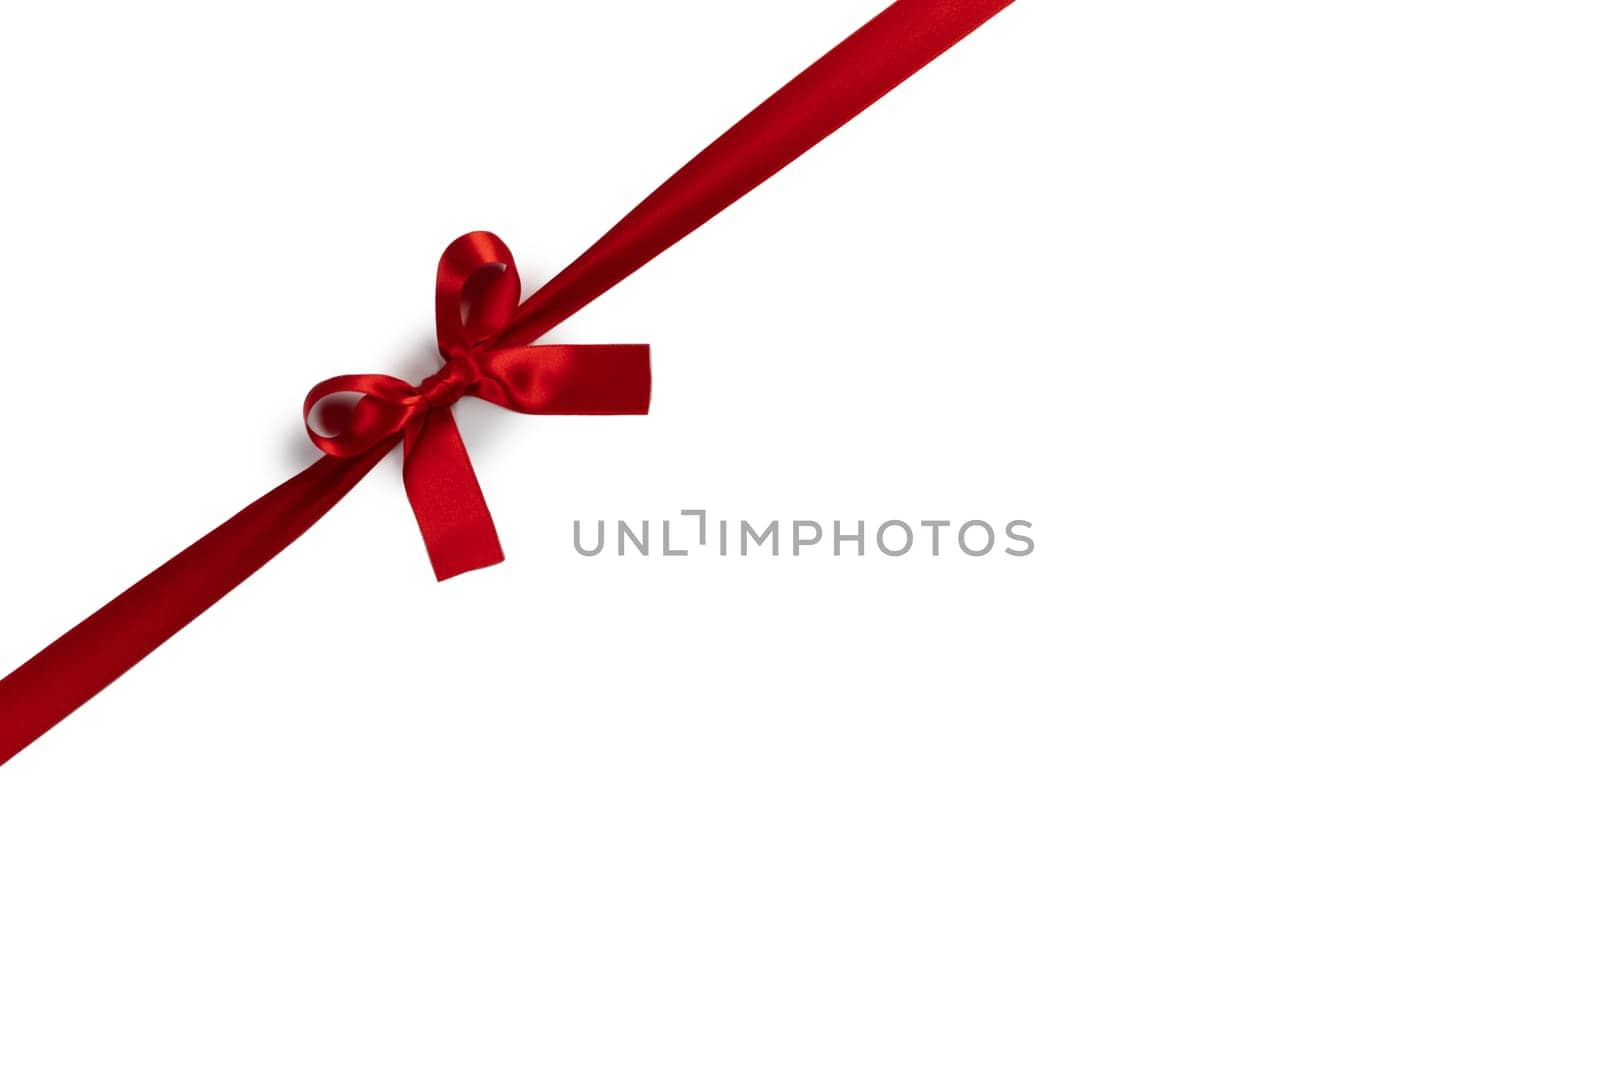 Red satin ribbon bow isolated on white background